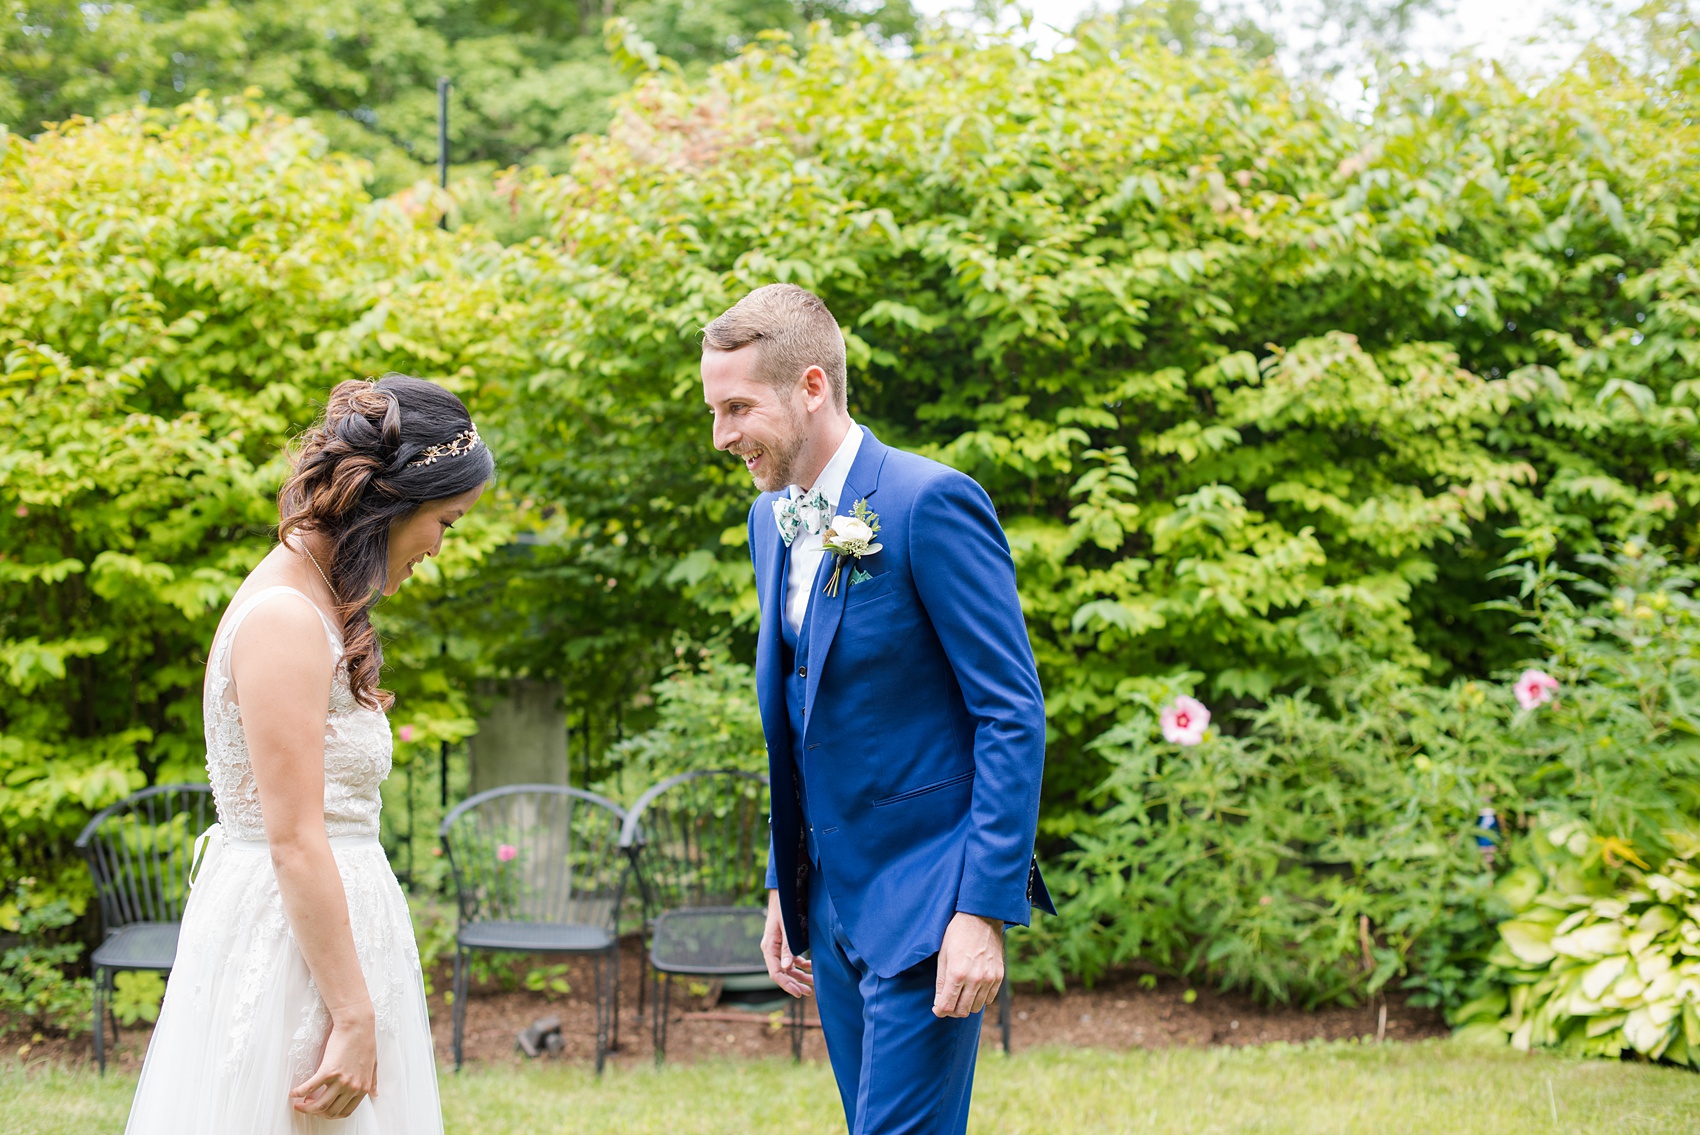 Wedding photos at Crabtree's Kittle House in Chappaqua, New York by Mikkel Paige Photography. This venue in Westchester county had the perfect garden for the bride and groom's first look. #firstlook #mikkelpaige #CrabtreesKittleHouse #WestchesterWeddingVenues #WestchesterWedding #summerwedding 